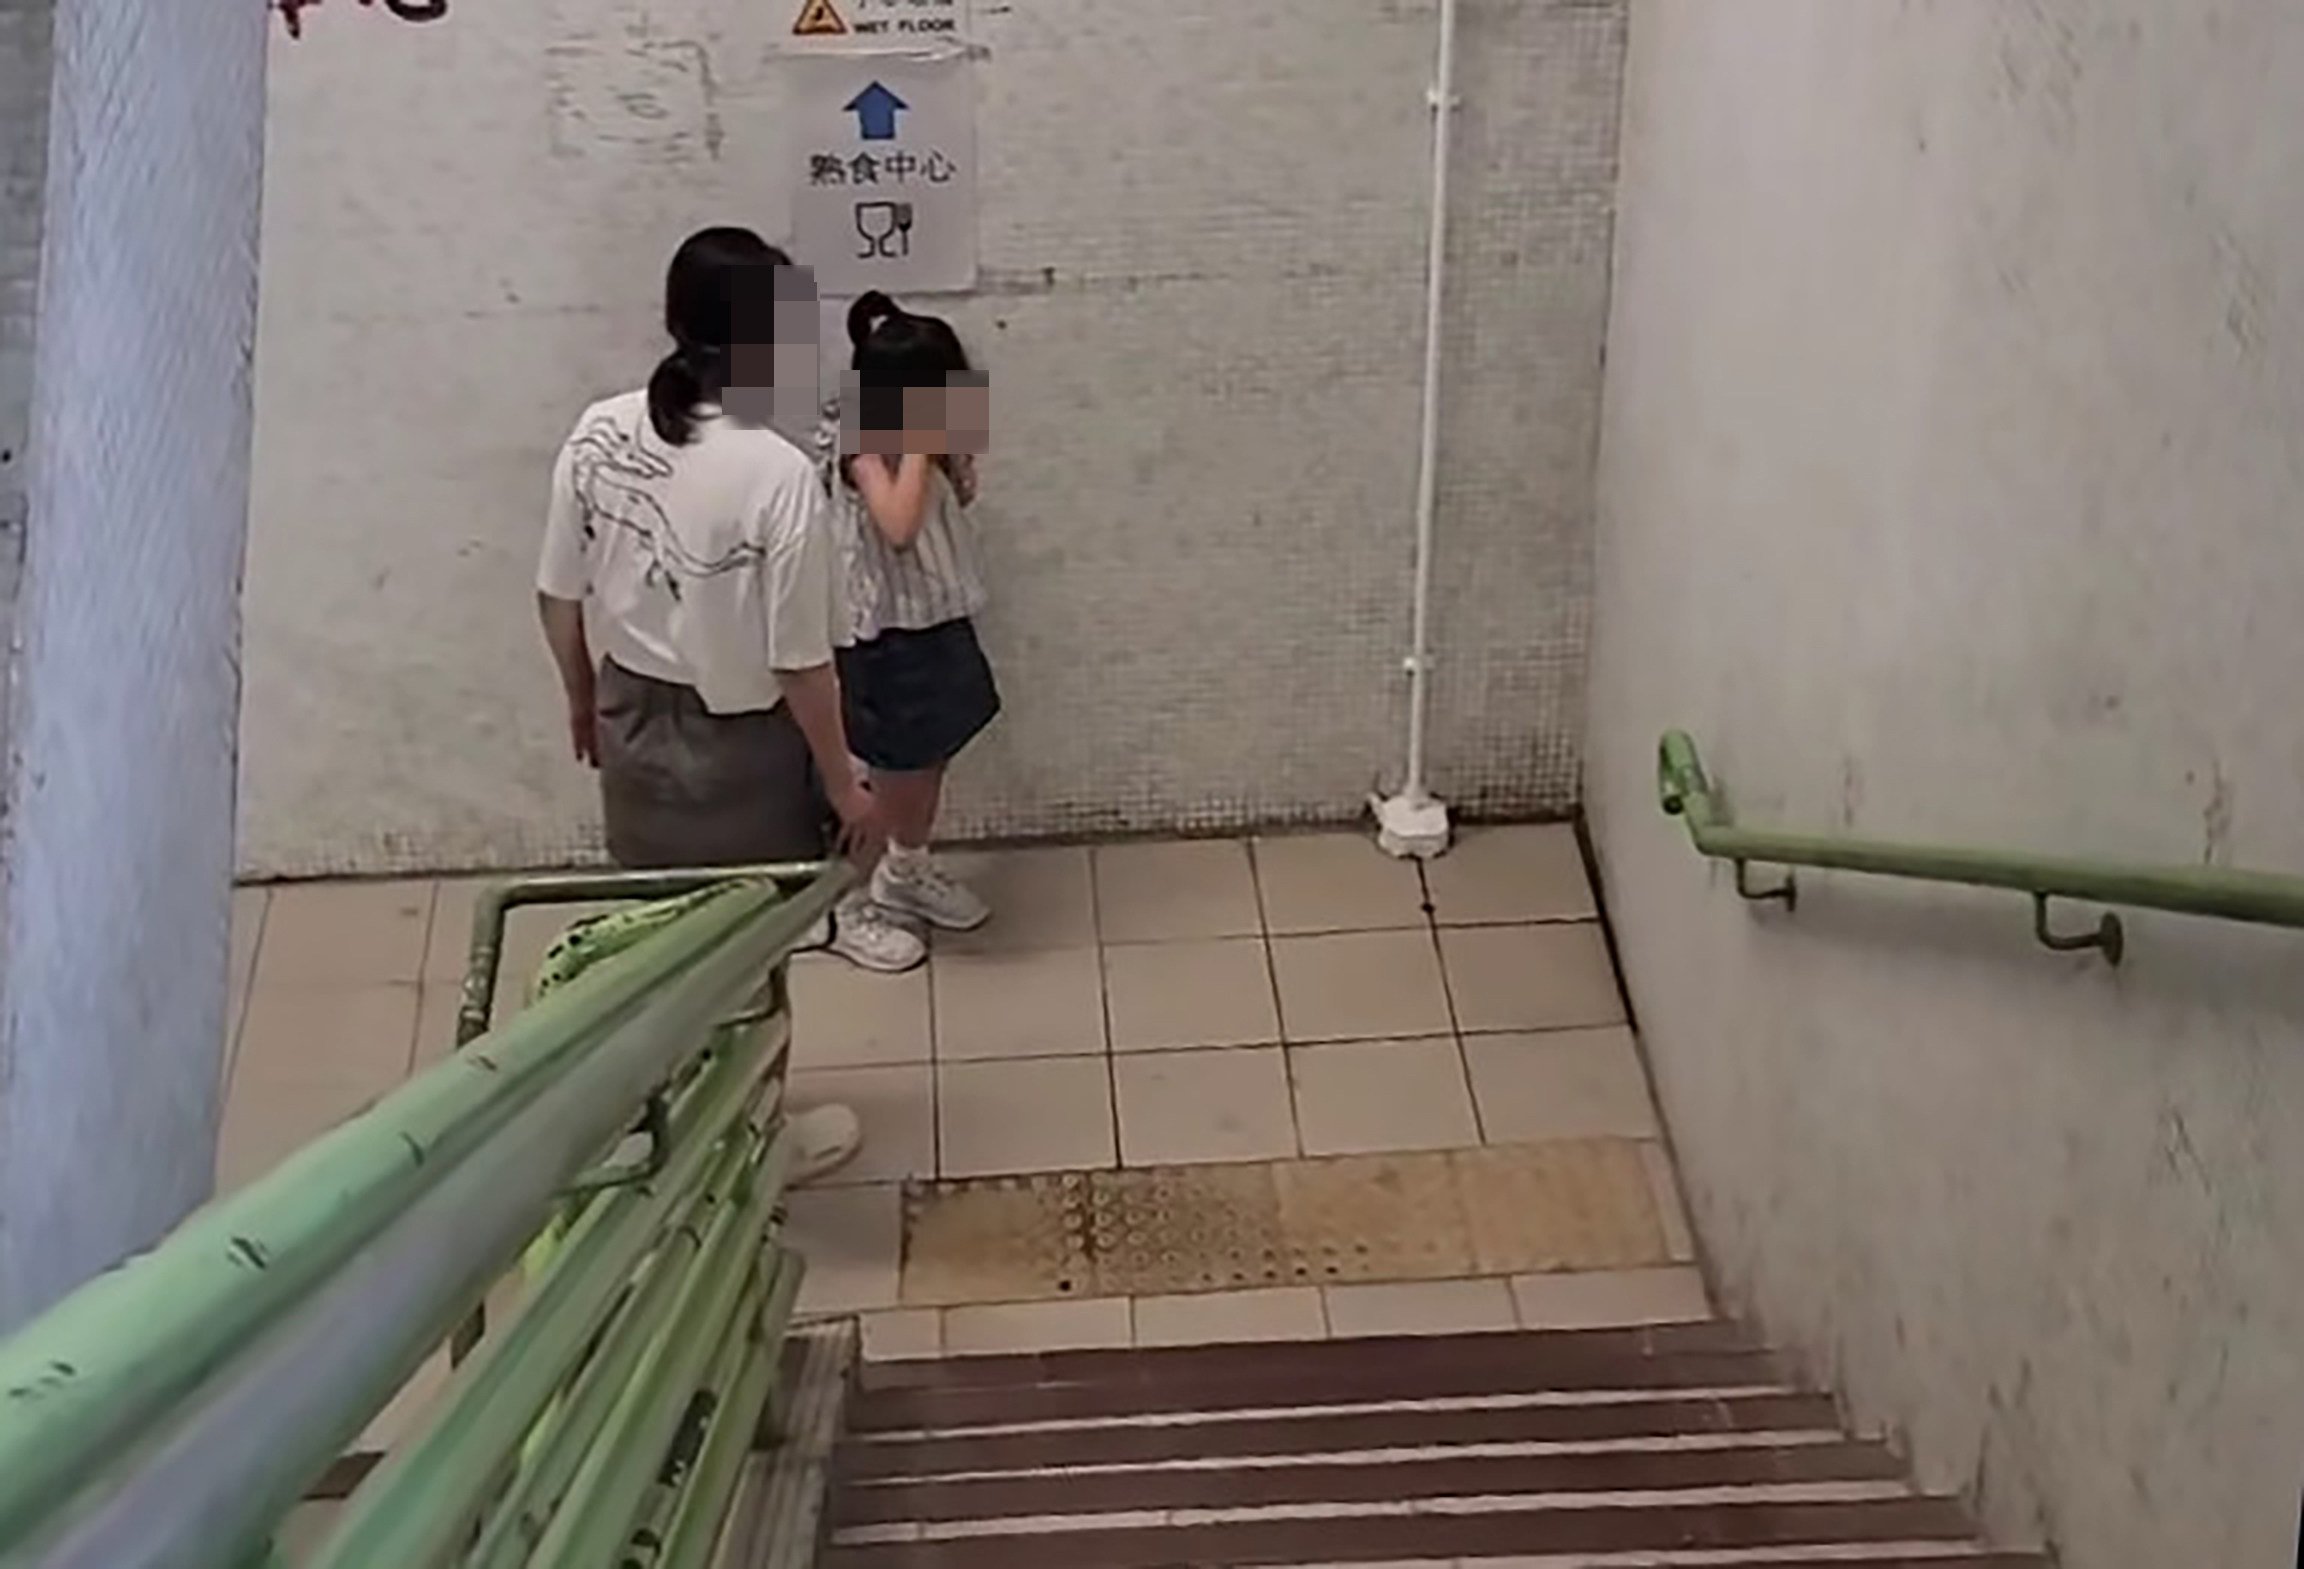 The video clip also shows the woman scolding the girl and slapping her on the backstairs of a building. Photo: Facebook /Boll Che Li